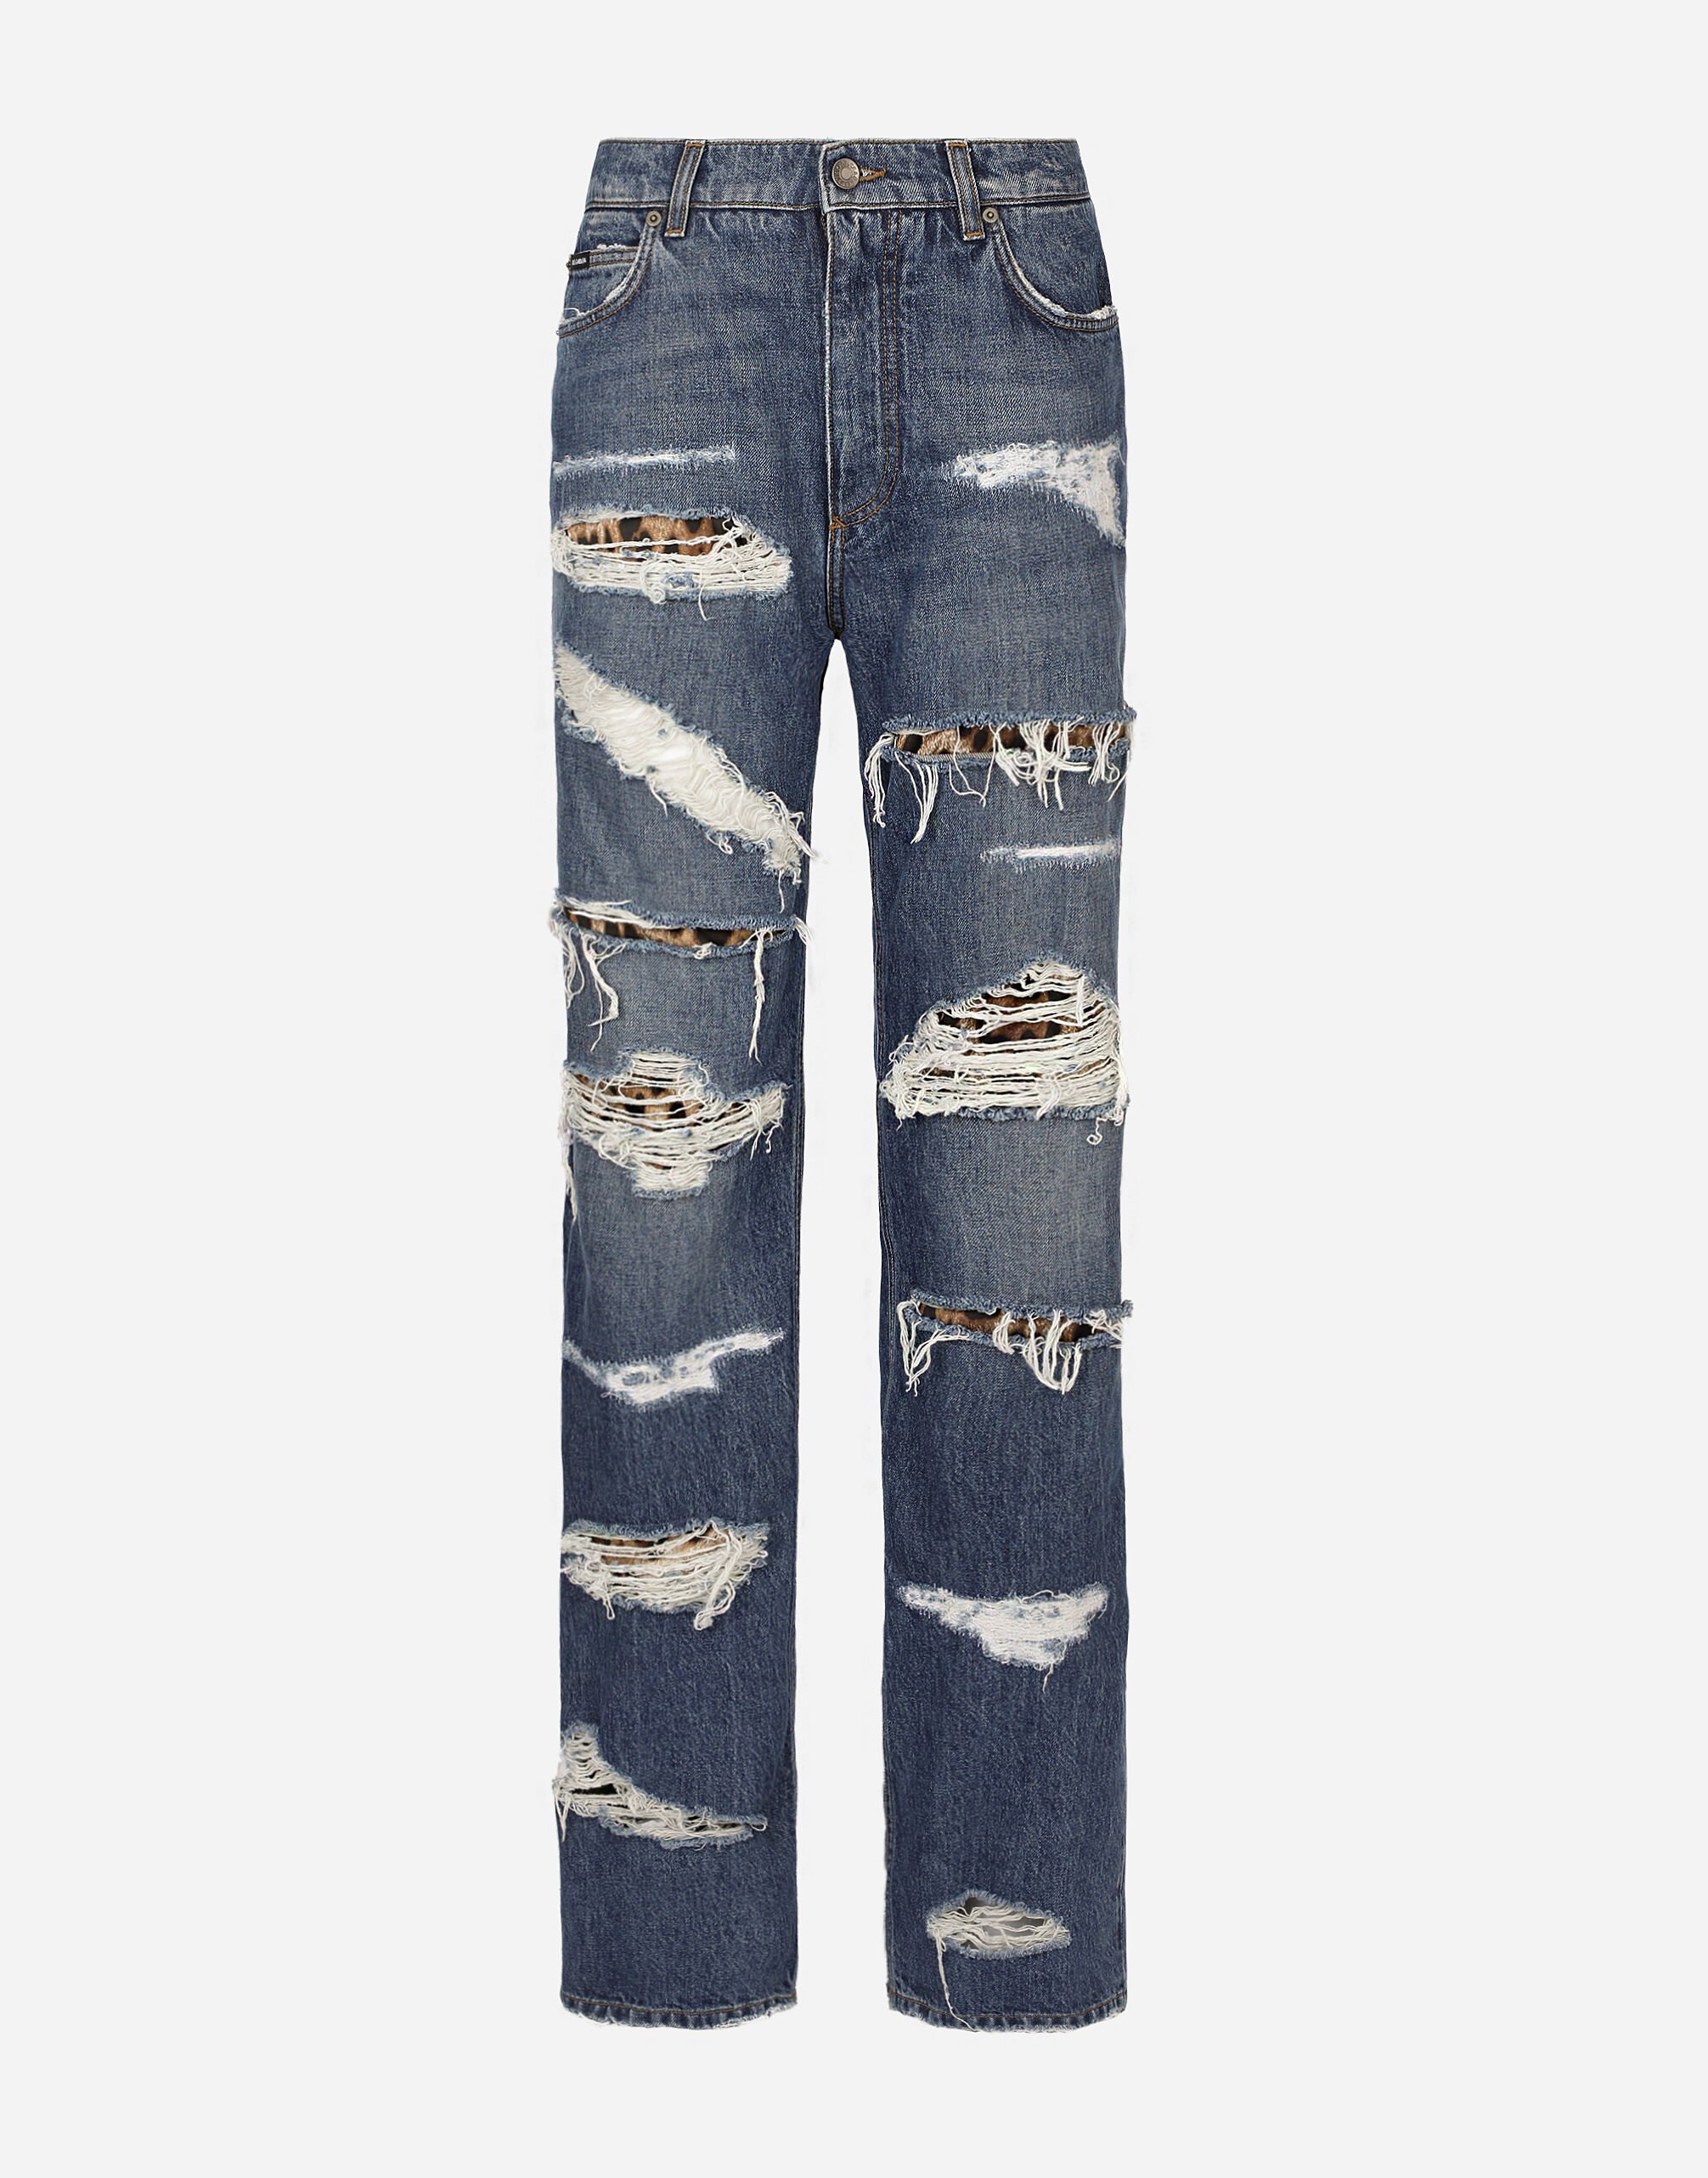 Dolce&Gabbana Loose-fit jeans with ripped details Animal Print BB6003AO043